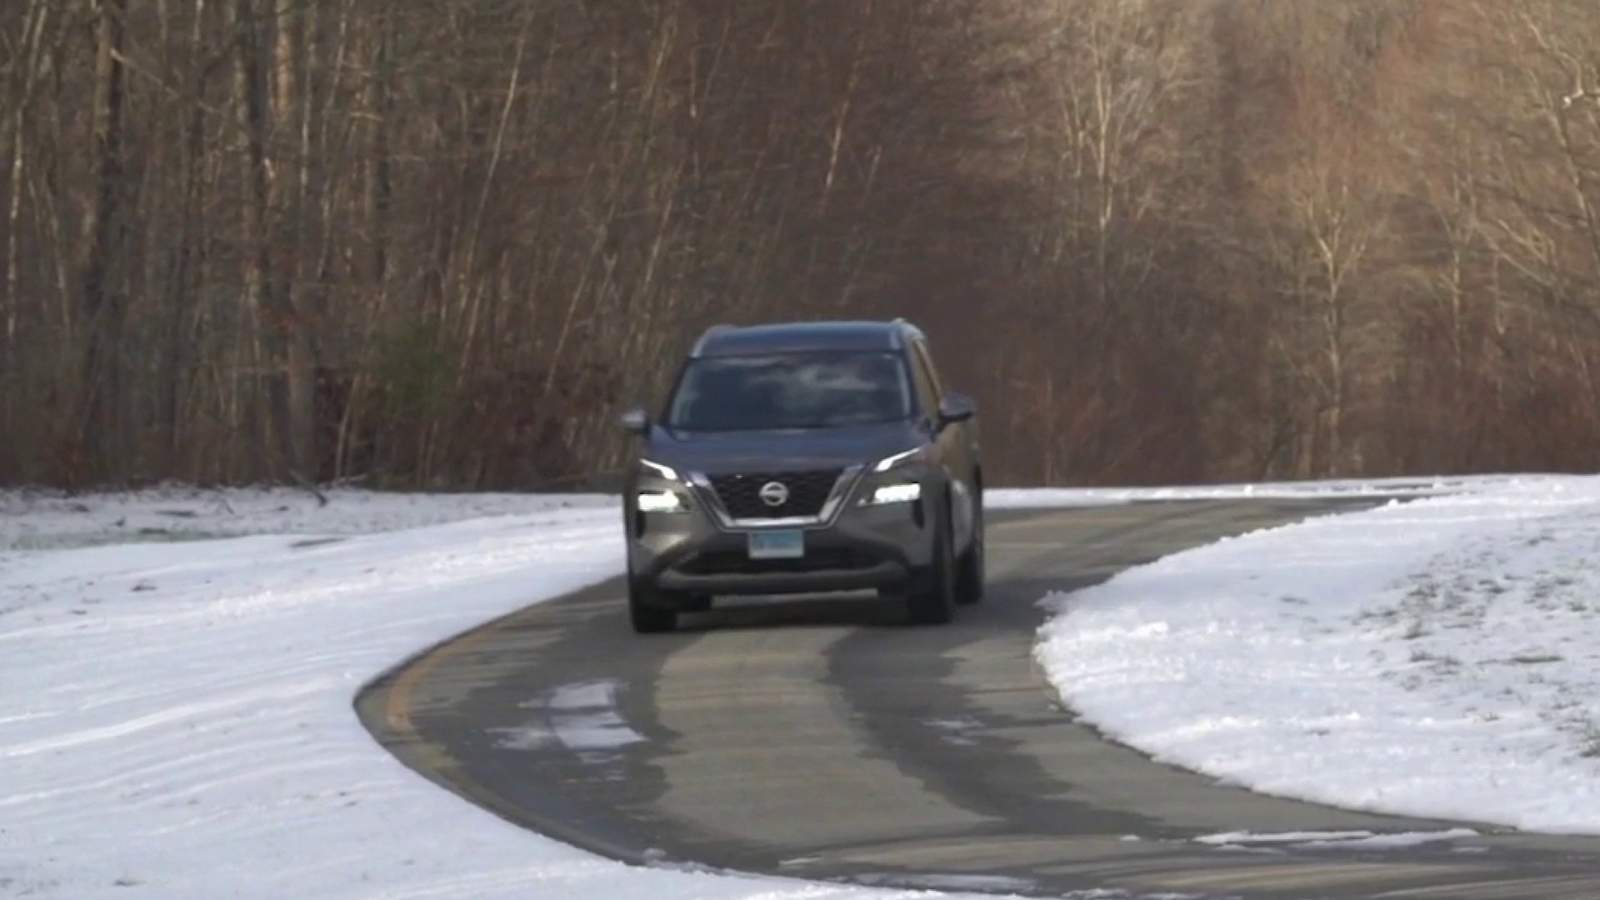 Here’s what drivers should do when they encounter ice on roadways